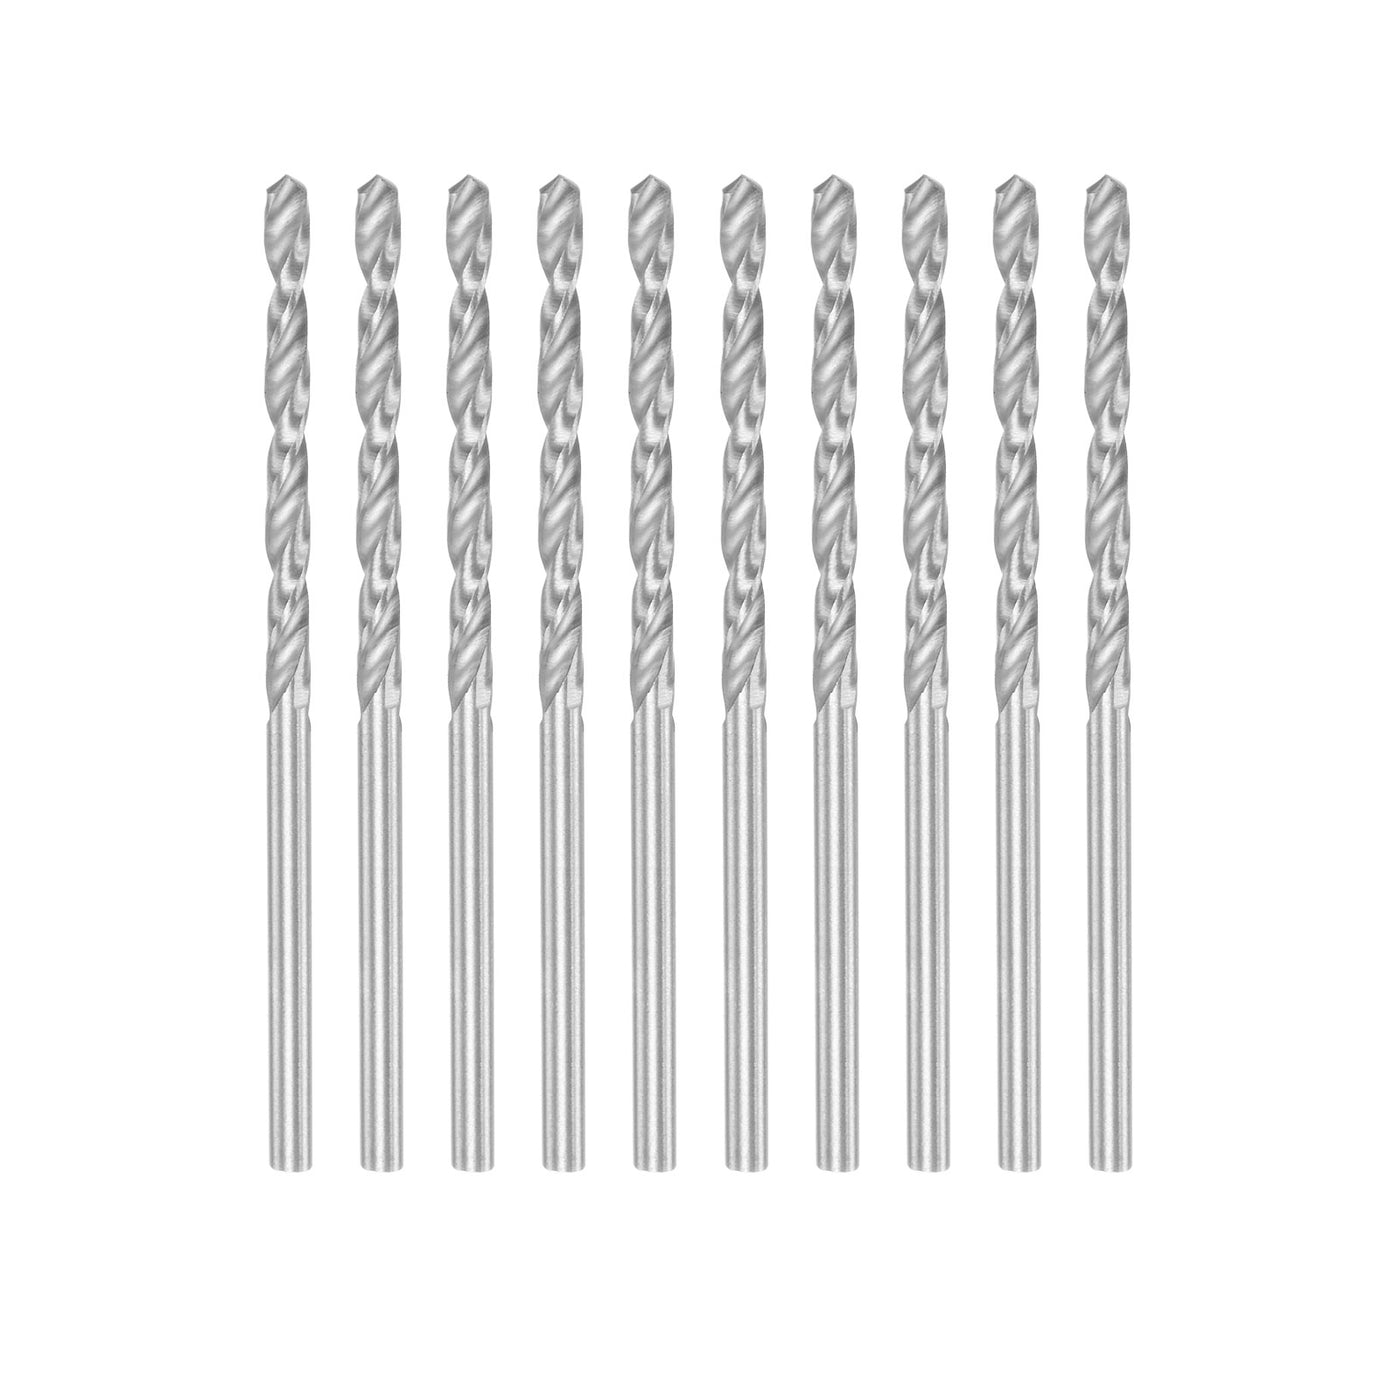 uxcell Uxcell 10 Pcs 2.3mm High Speed Steel Drill Bits, Fully Ground 53mm Length Drill Bit